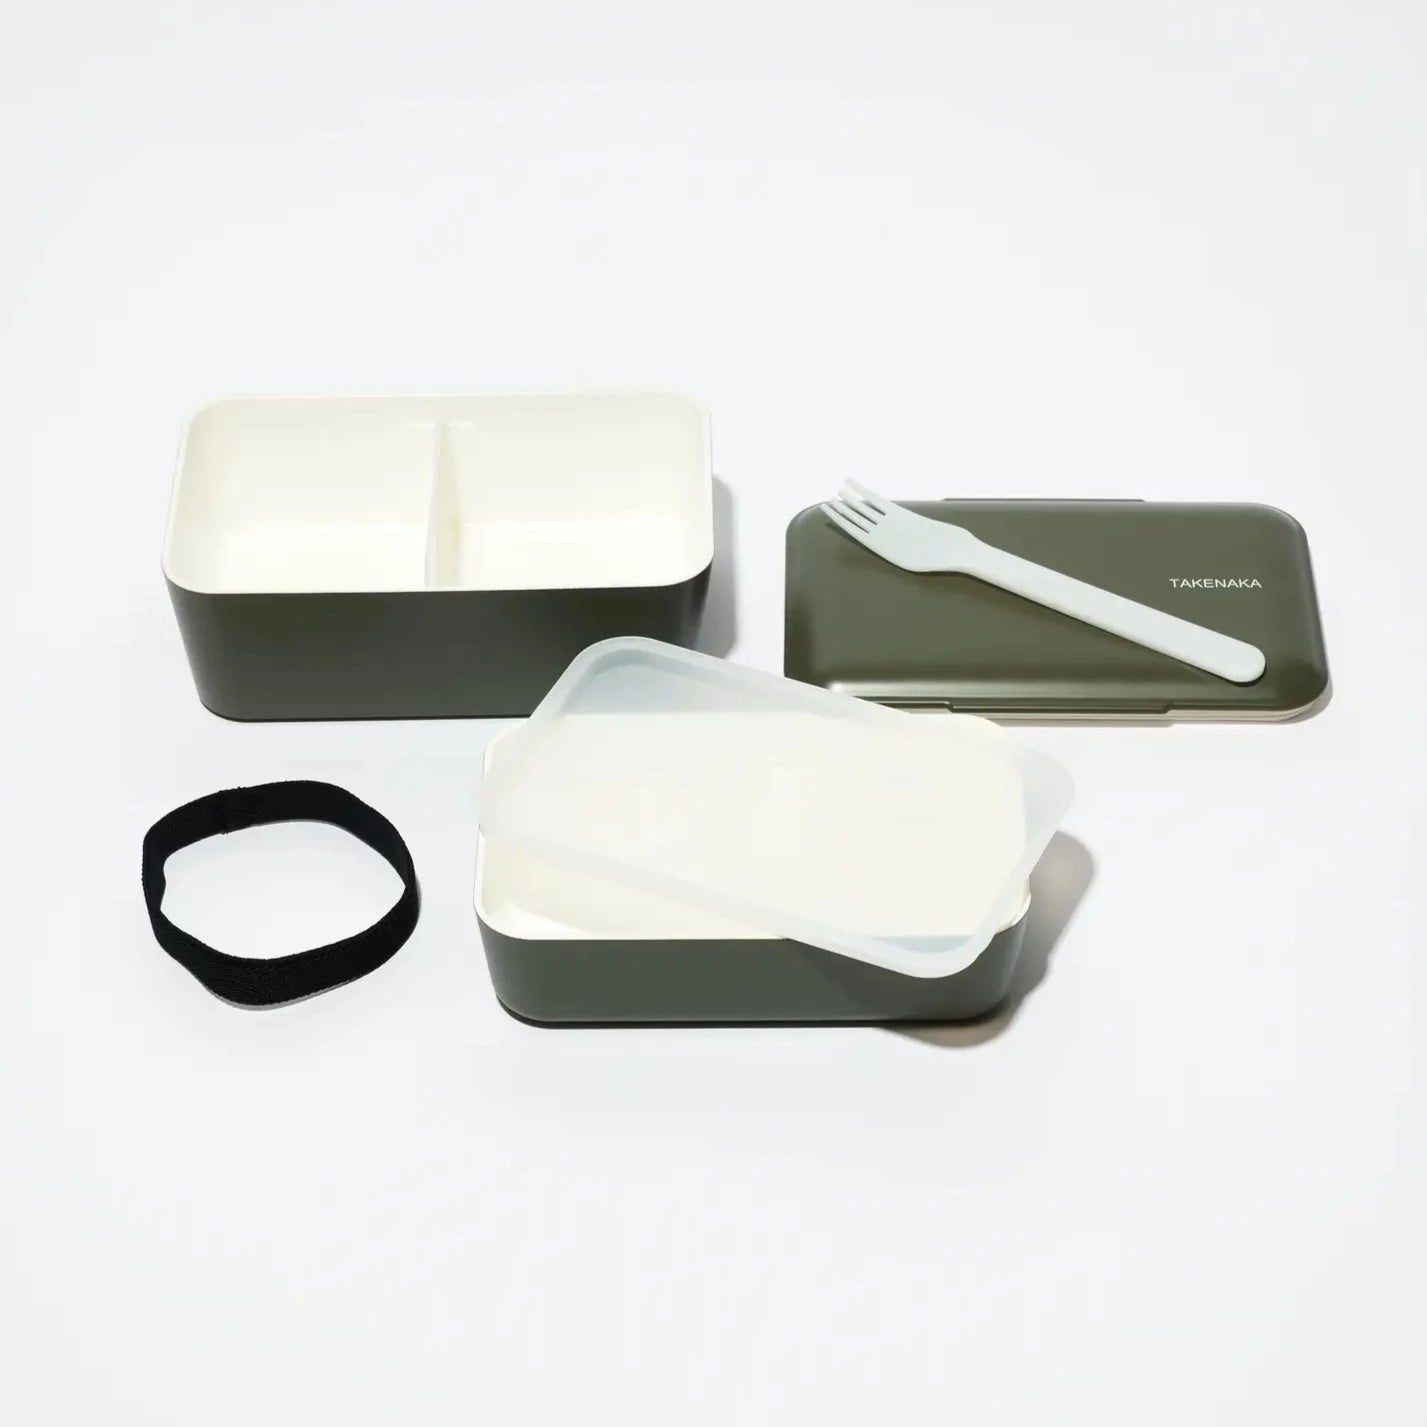 Dual Bento Box separated into sections -- bottom compartment with fork, top compartment with center divider, elastic band to hold it all together 